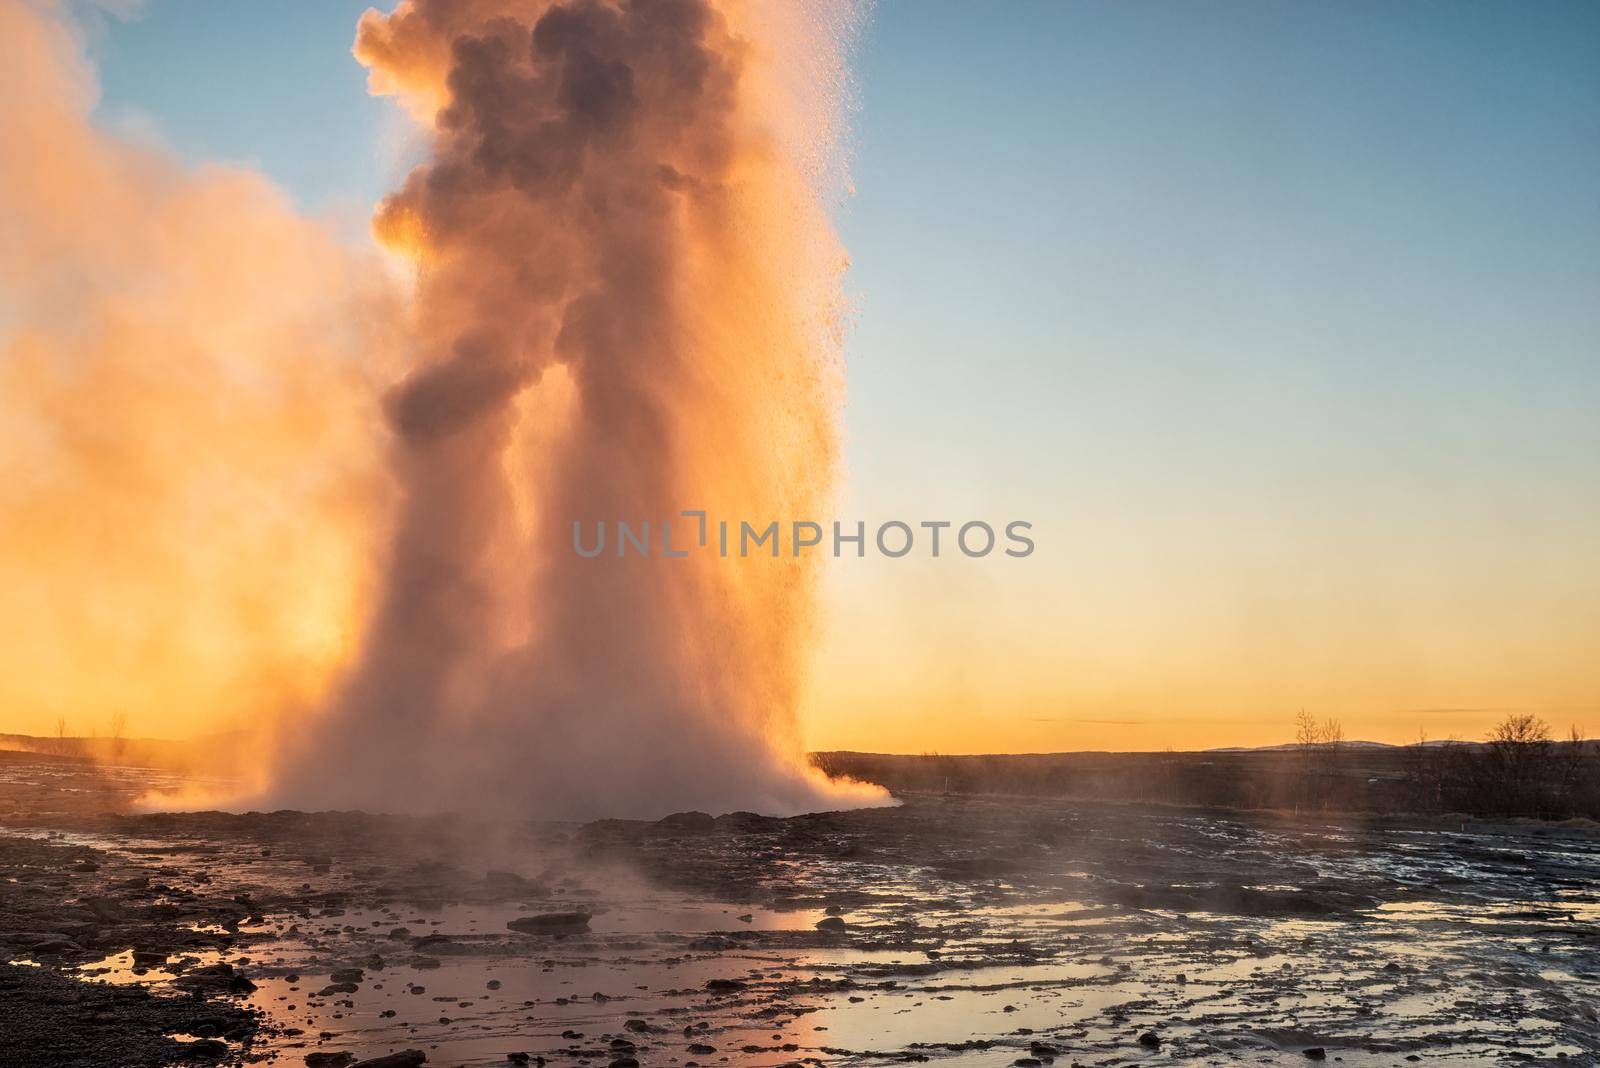 Eruption of the Geysir in Iceland during the sunrise